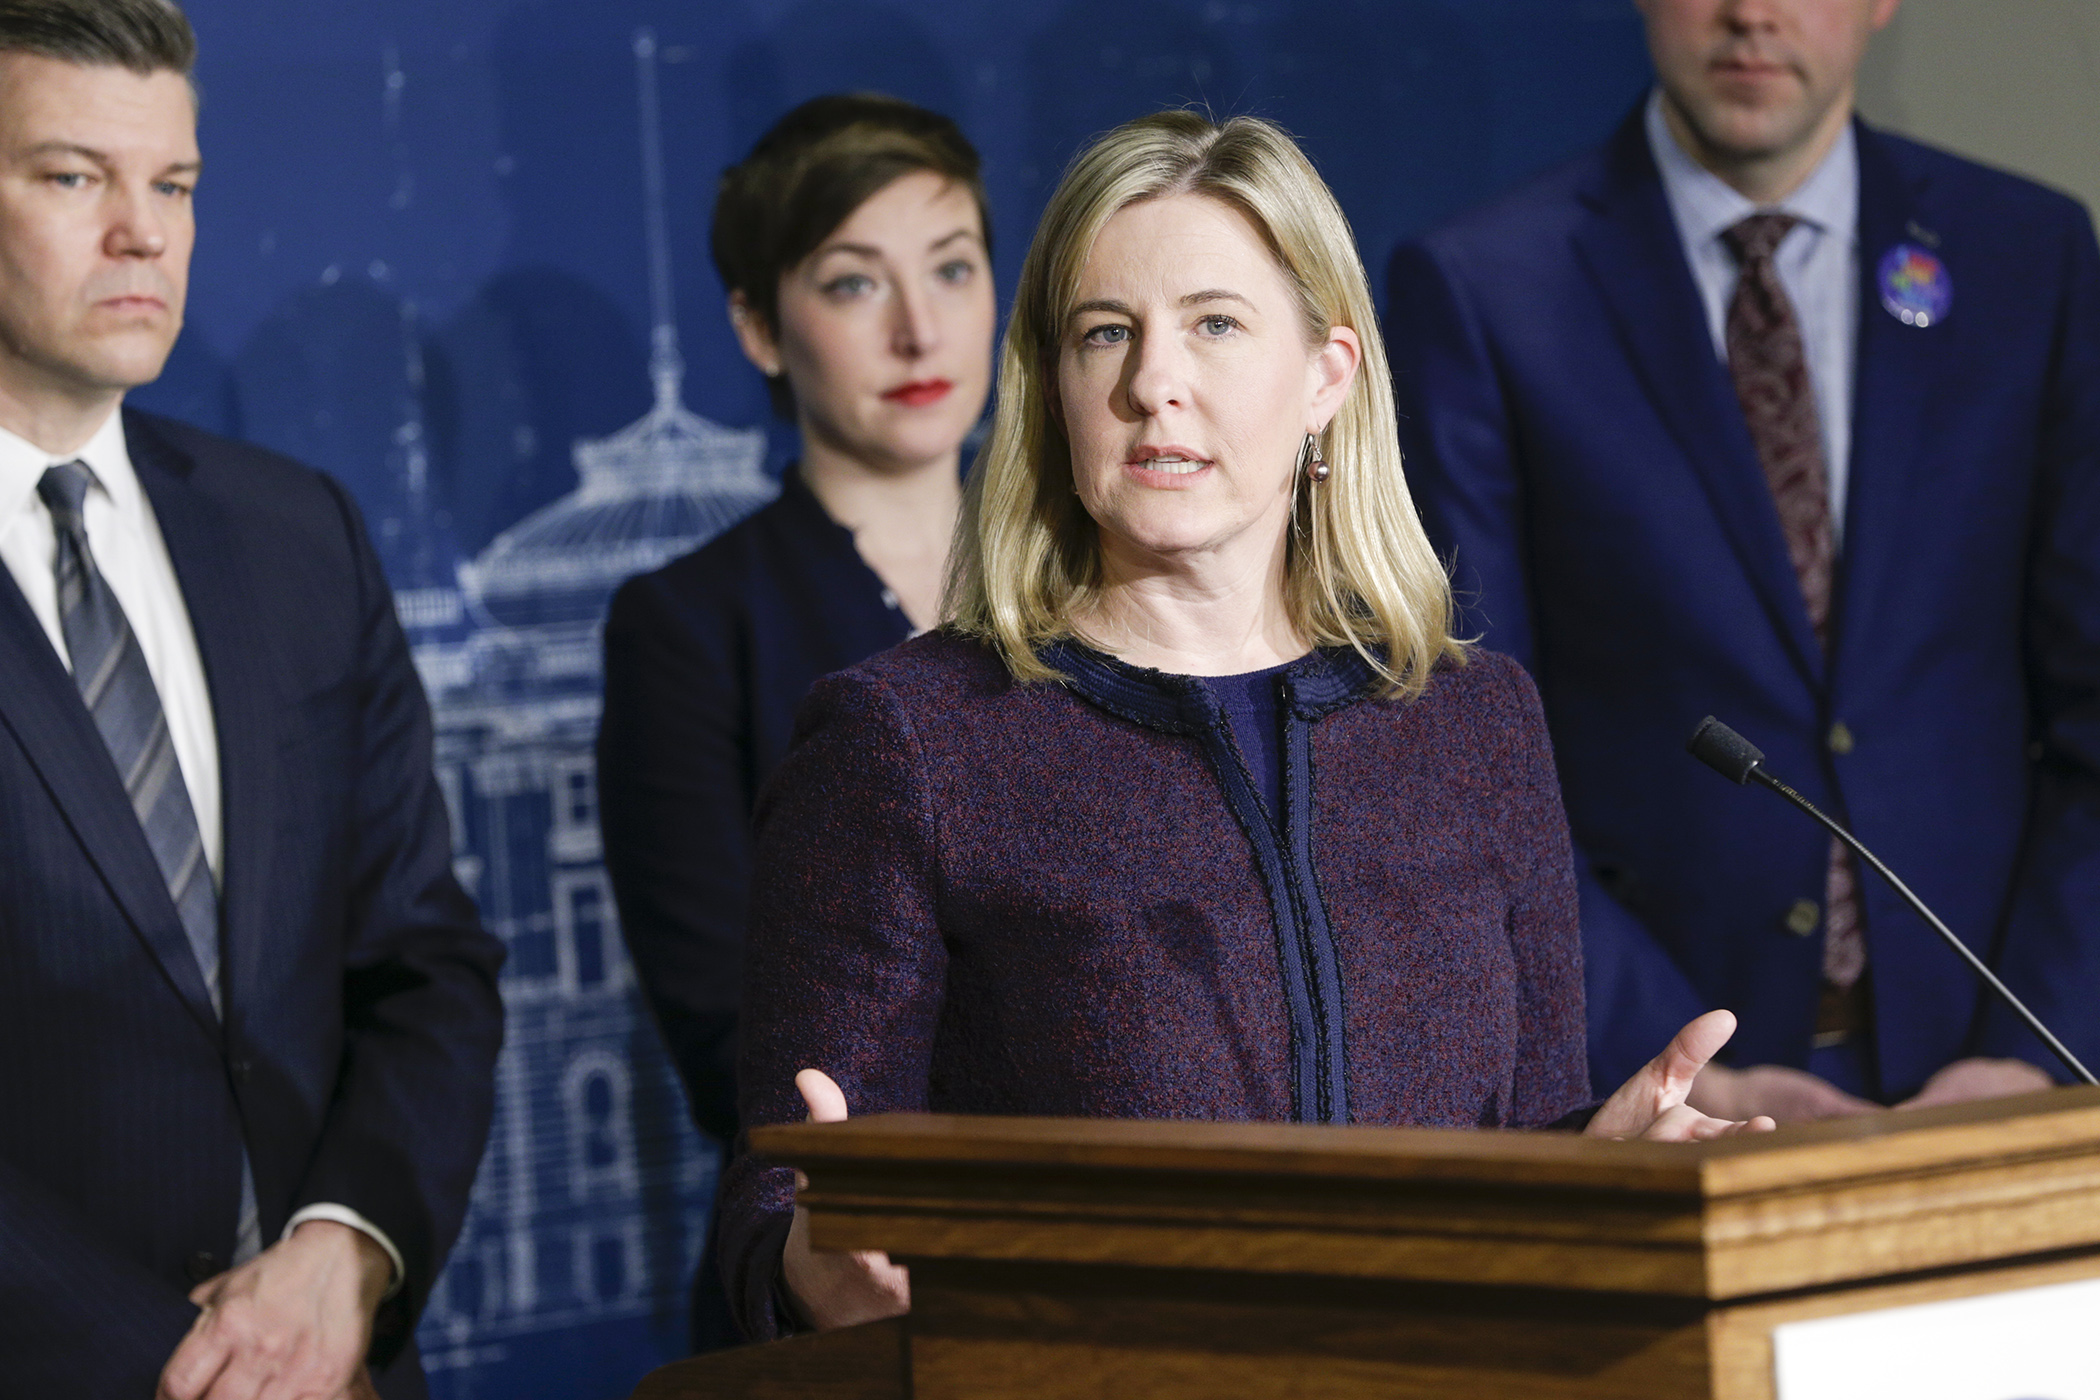 House Speaker Melissa Hortman outlines the House DFL “2020 Minnesota Values Plan” for the upcoming legislative session at a Feb. 6 press conference. Photo by Paul Battaglia